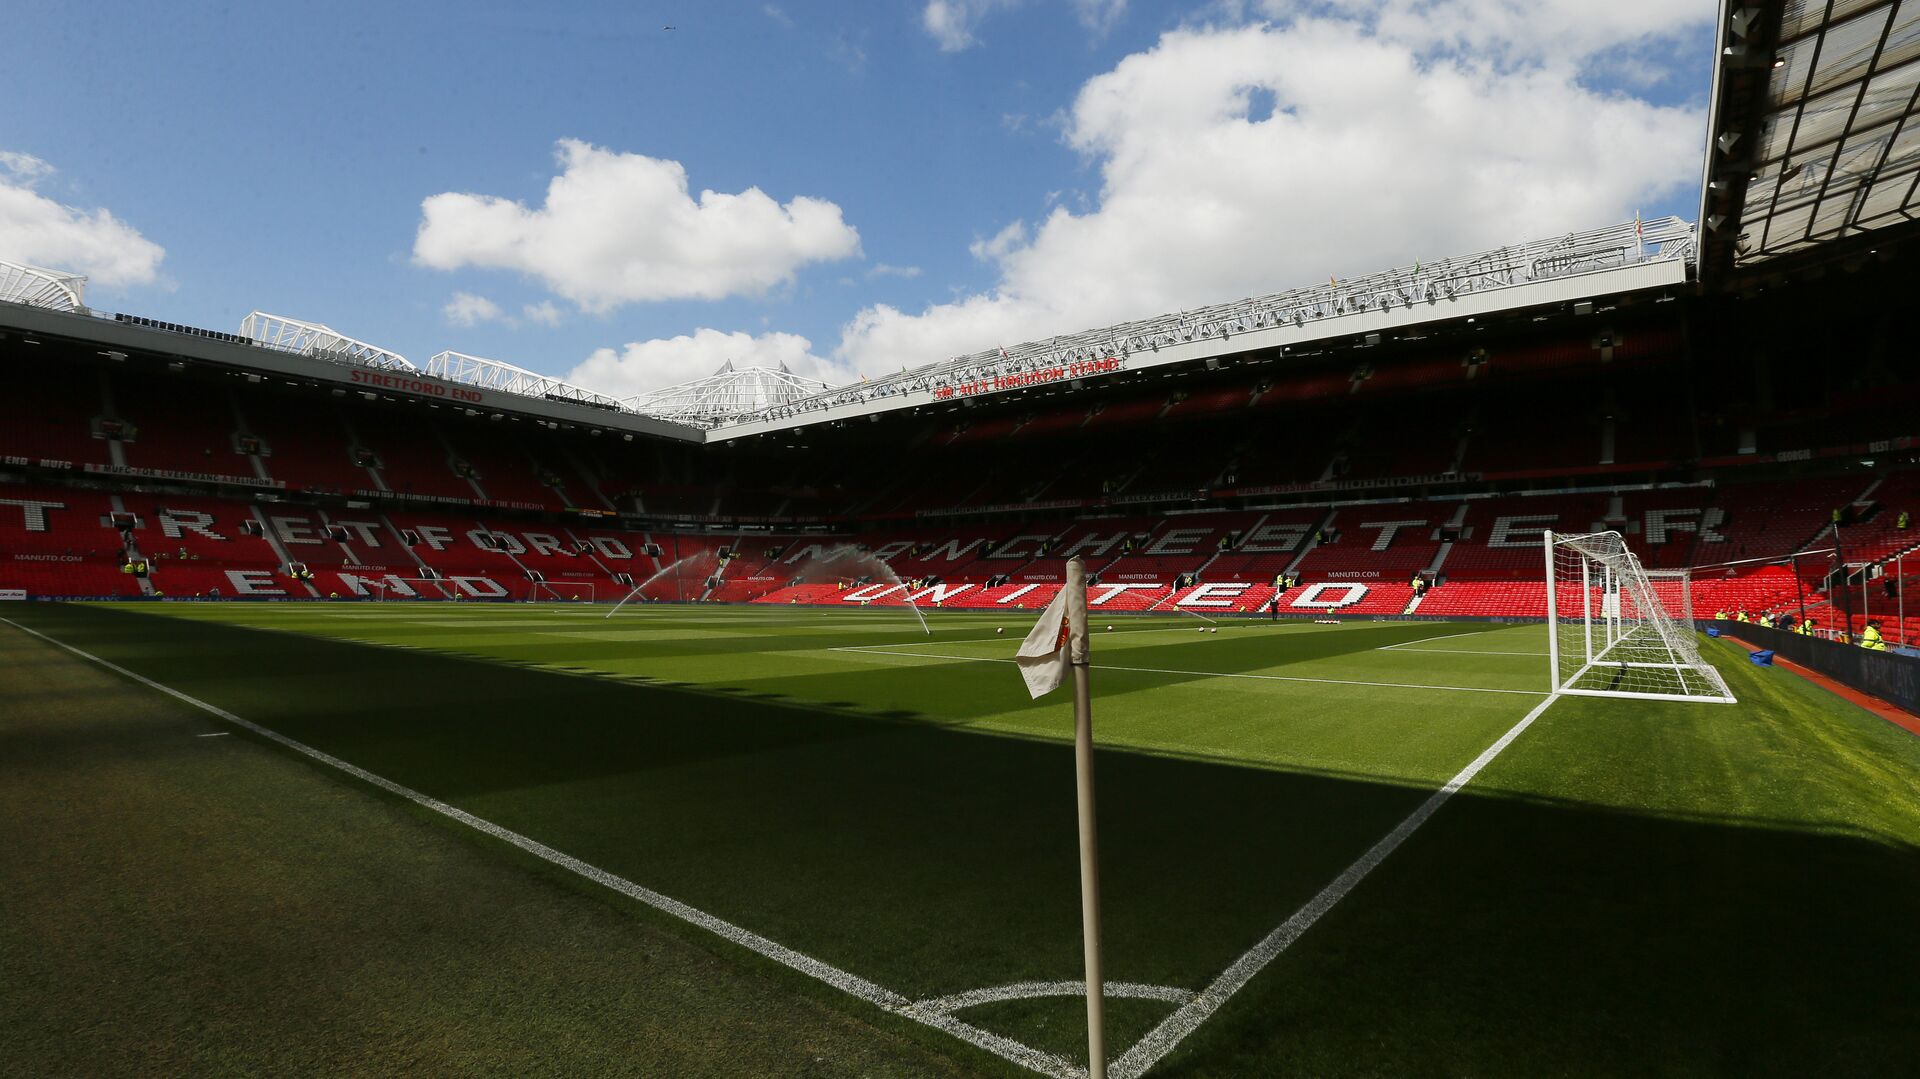 Britain Soccer Football - Manchester United v AFC Bournemouth - Barclays Premier League - Old Trafford - 15/5/16 General view inside the ground before the game  - اسپوتنیک افغانستان  , 1920, 12.02.2022